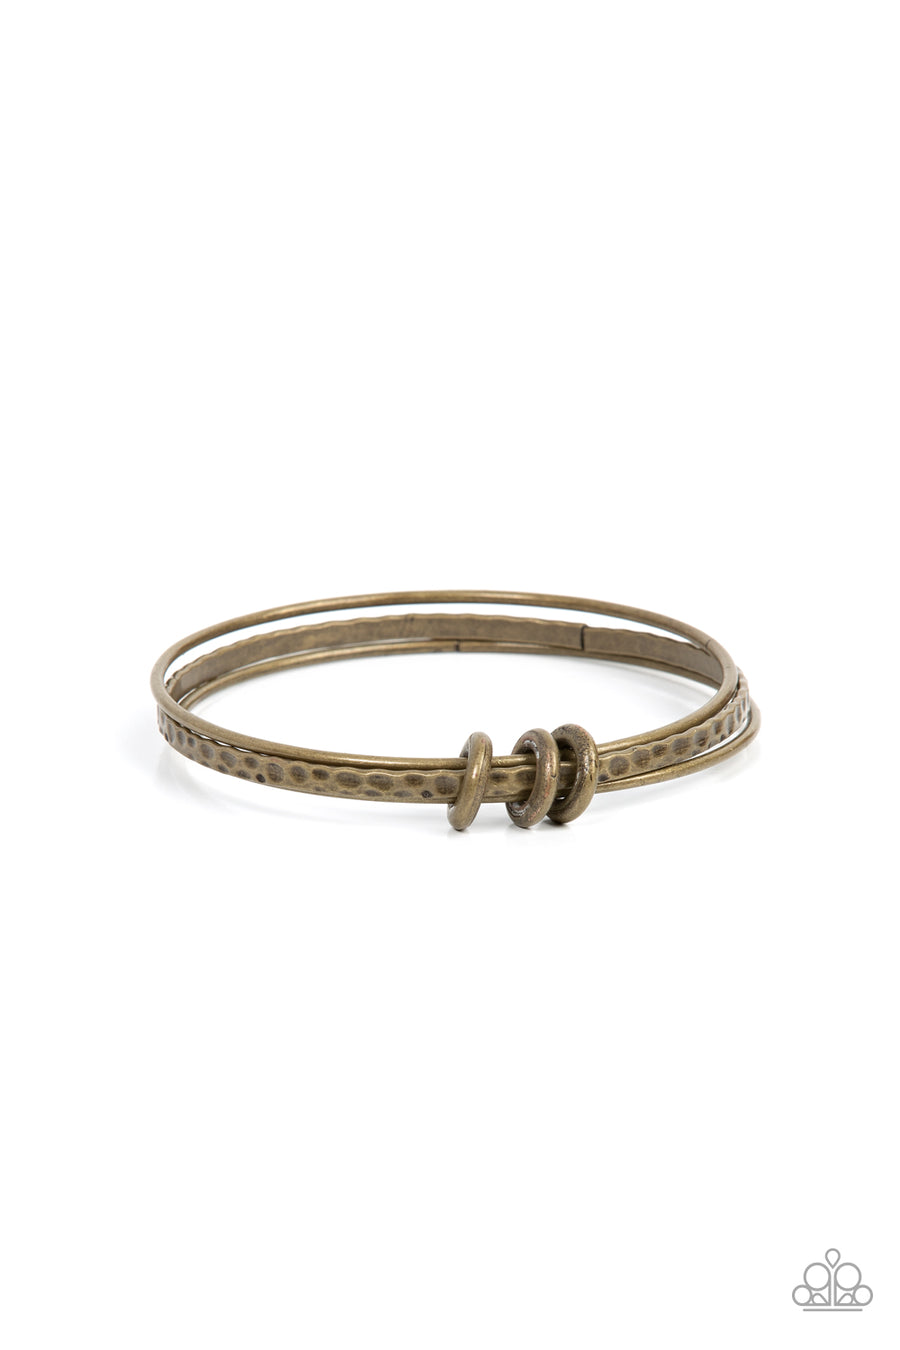 Bauble Bash - Brass Bracelet - Paparazzi Accessories - A trio of brass bangles featuring smooth and hammered textures mingles together around the wrist. Three simple brass rings encircle and slide along the bangles, elevating the simple combination into an artistic expression. Sold as one set of three bracelets.